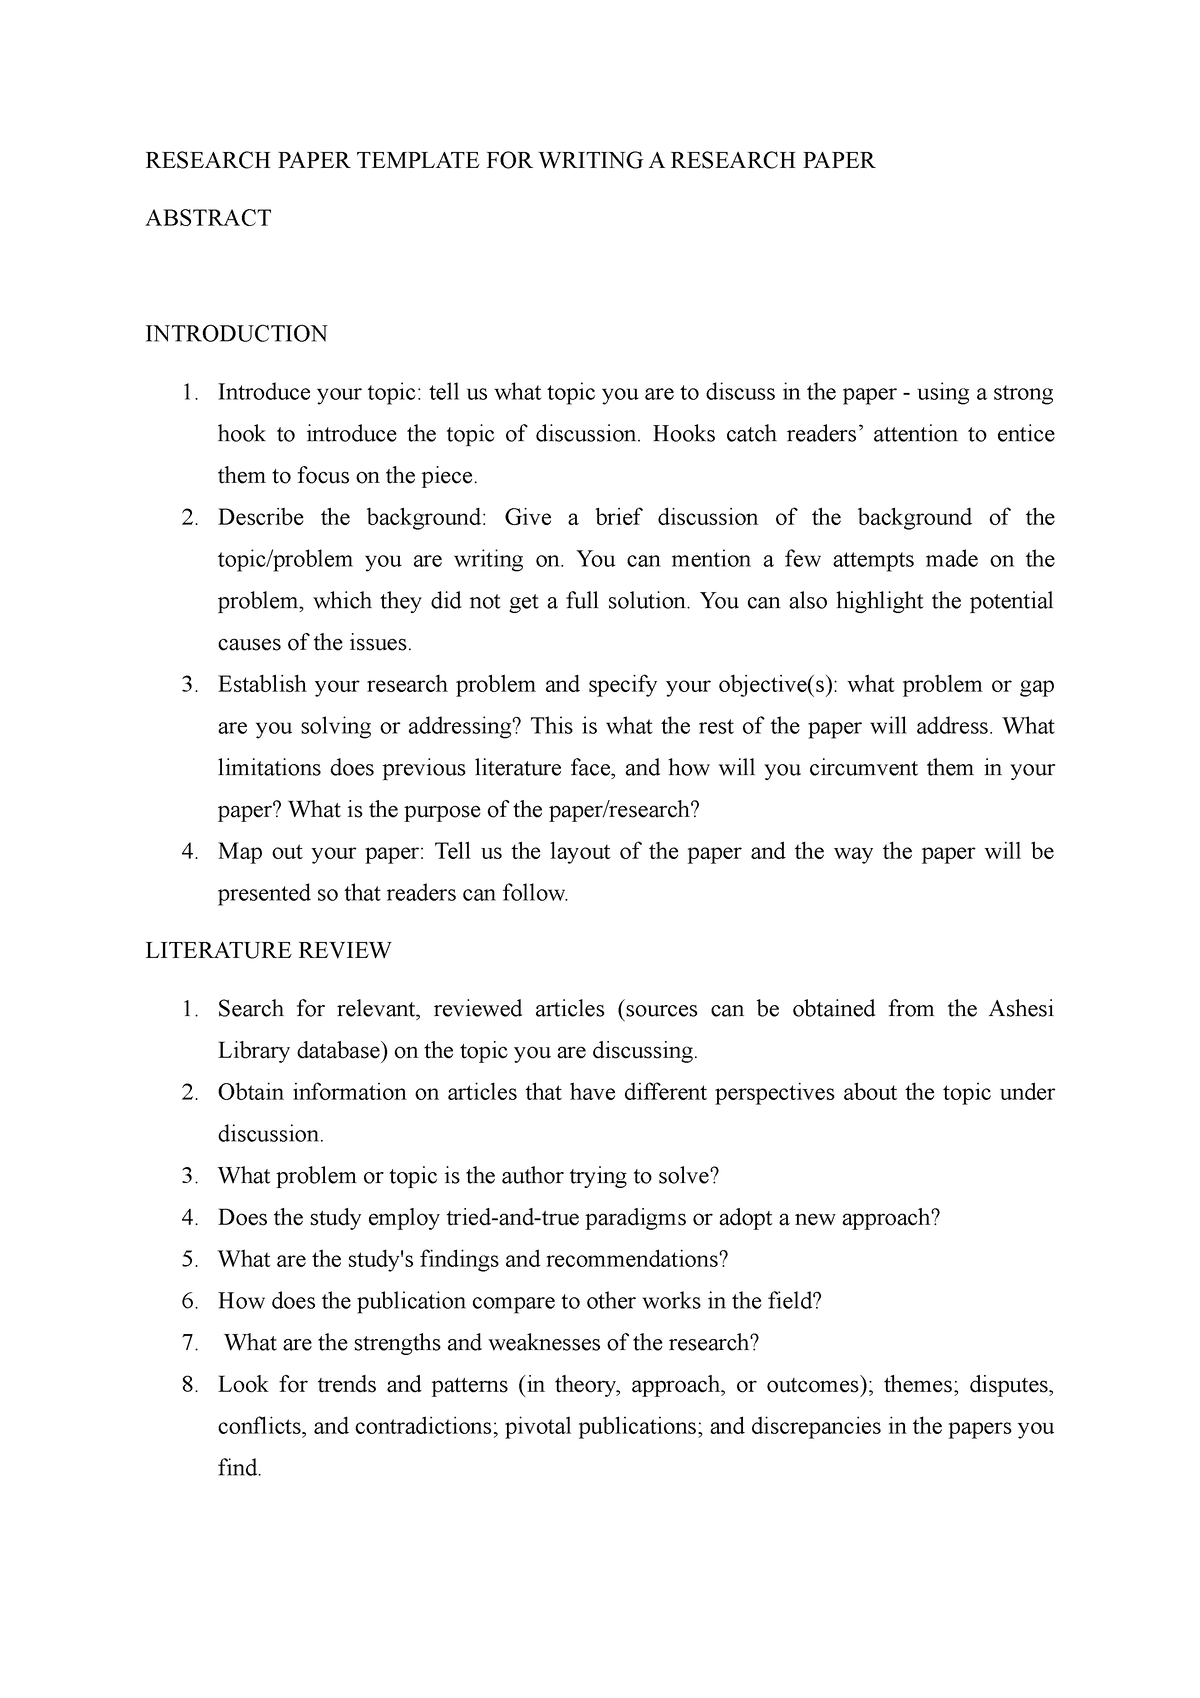 research-paper-template-research-paper-template-for-writing-a